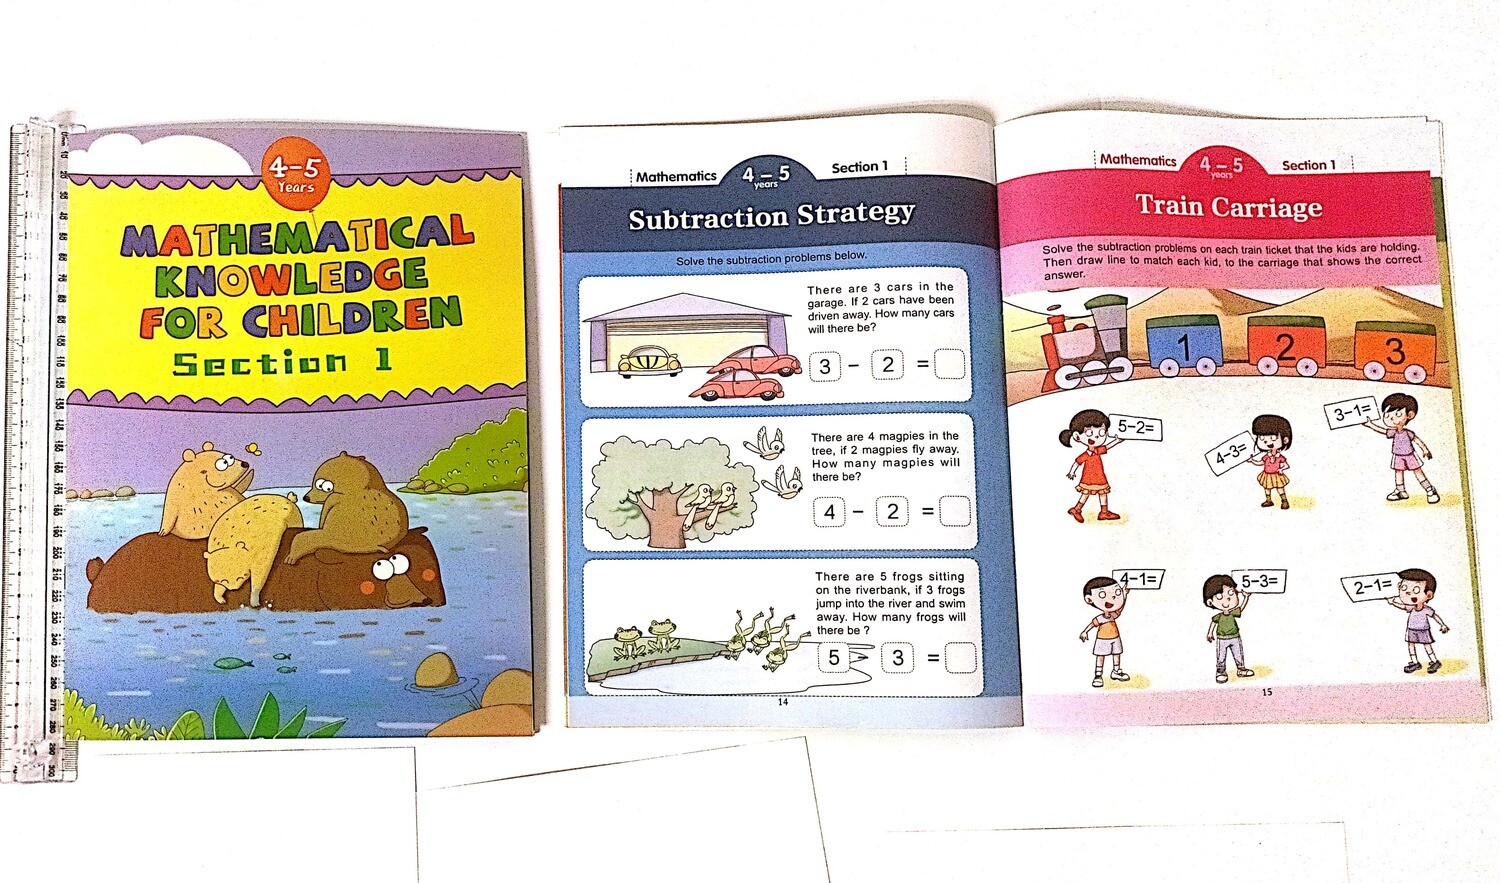 Maths Knowledge Section (1) 4-5 Years